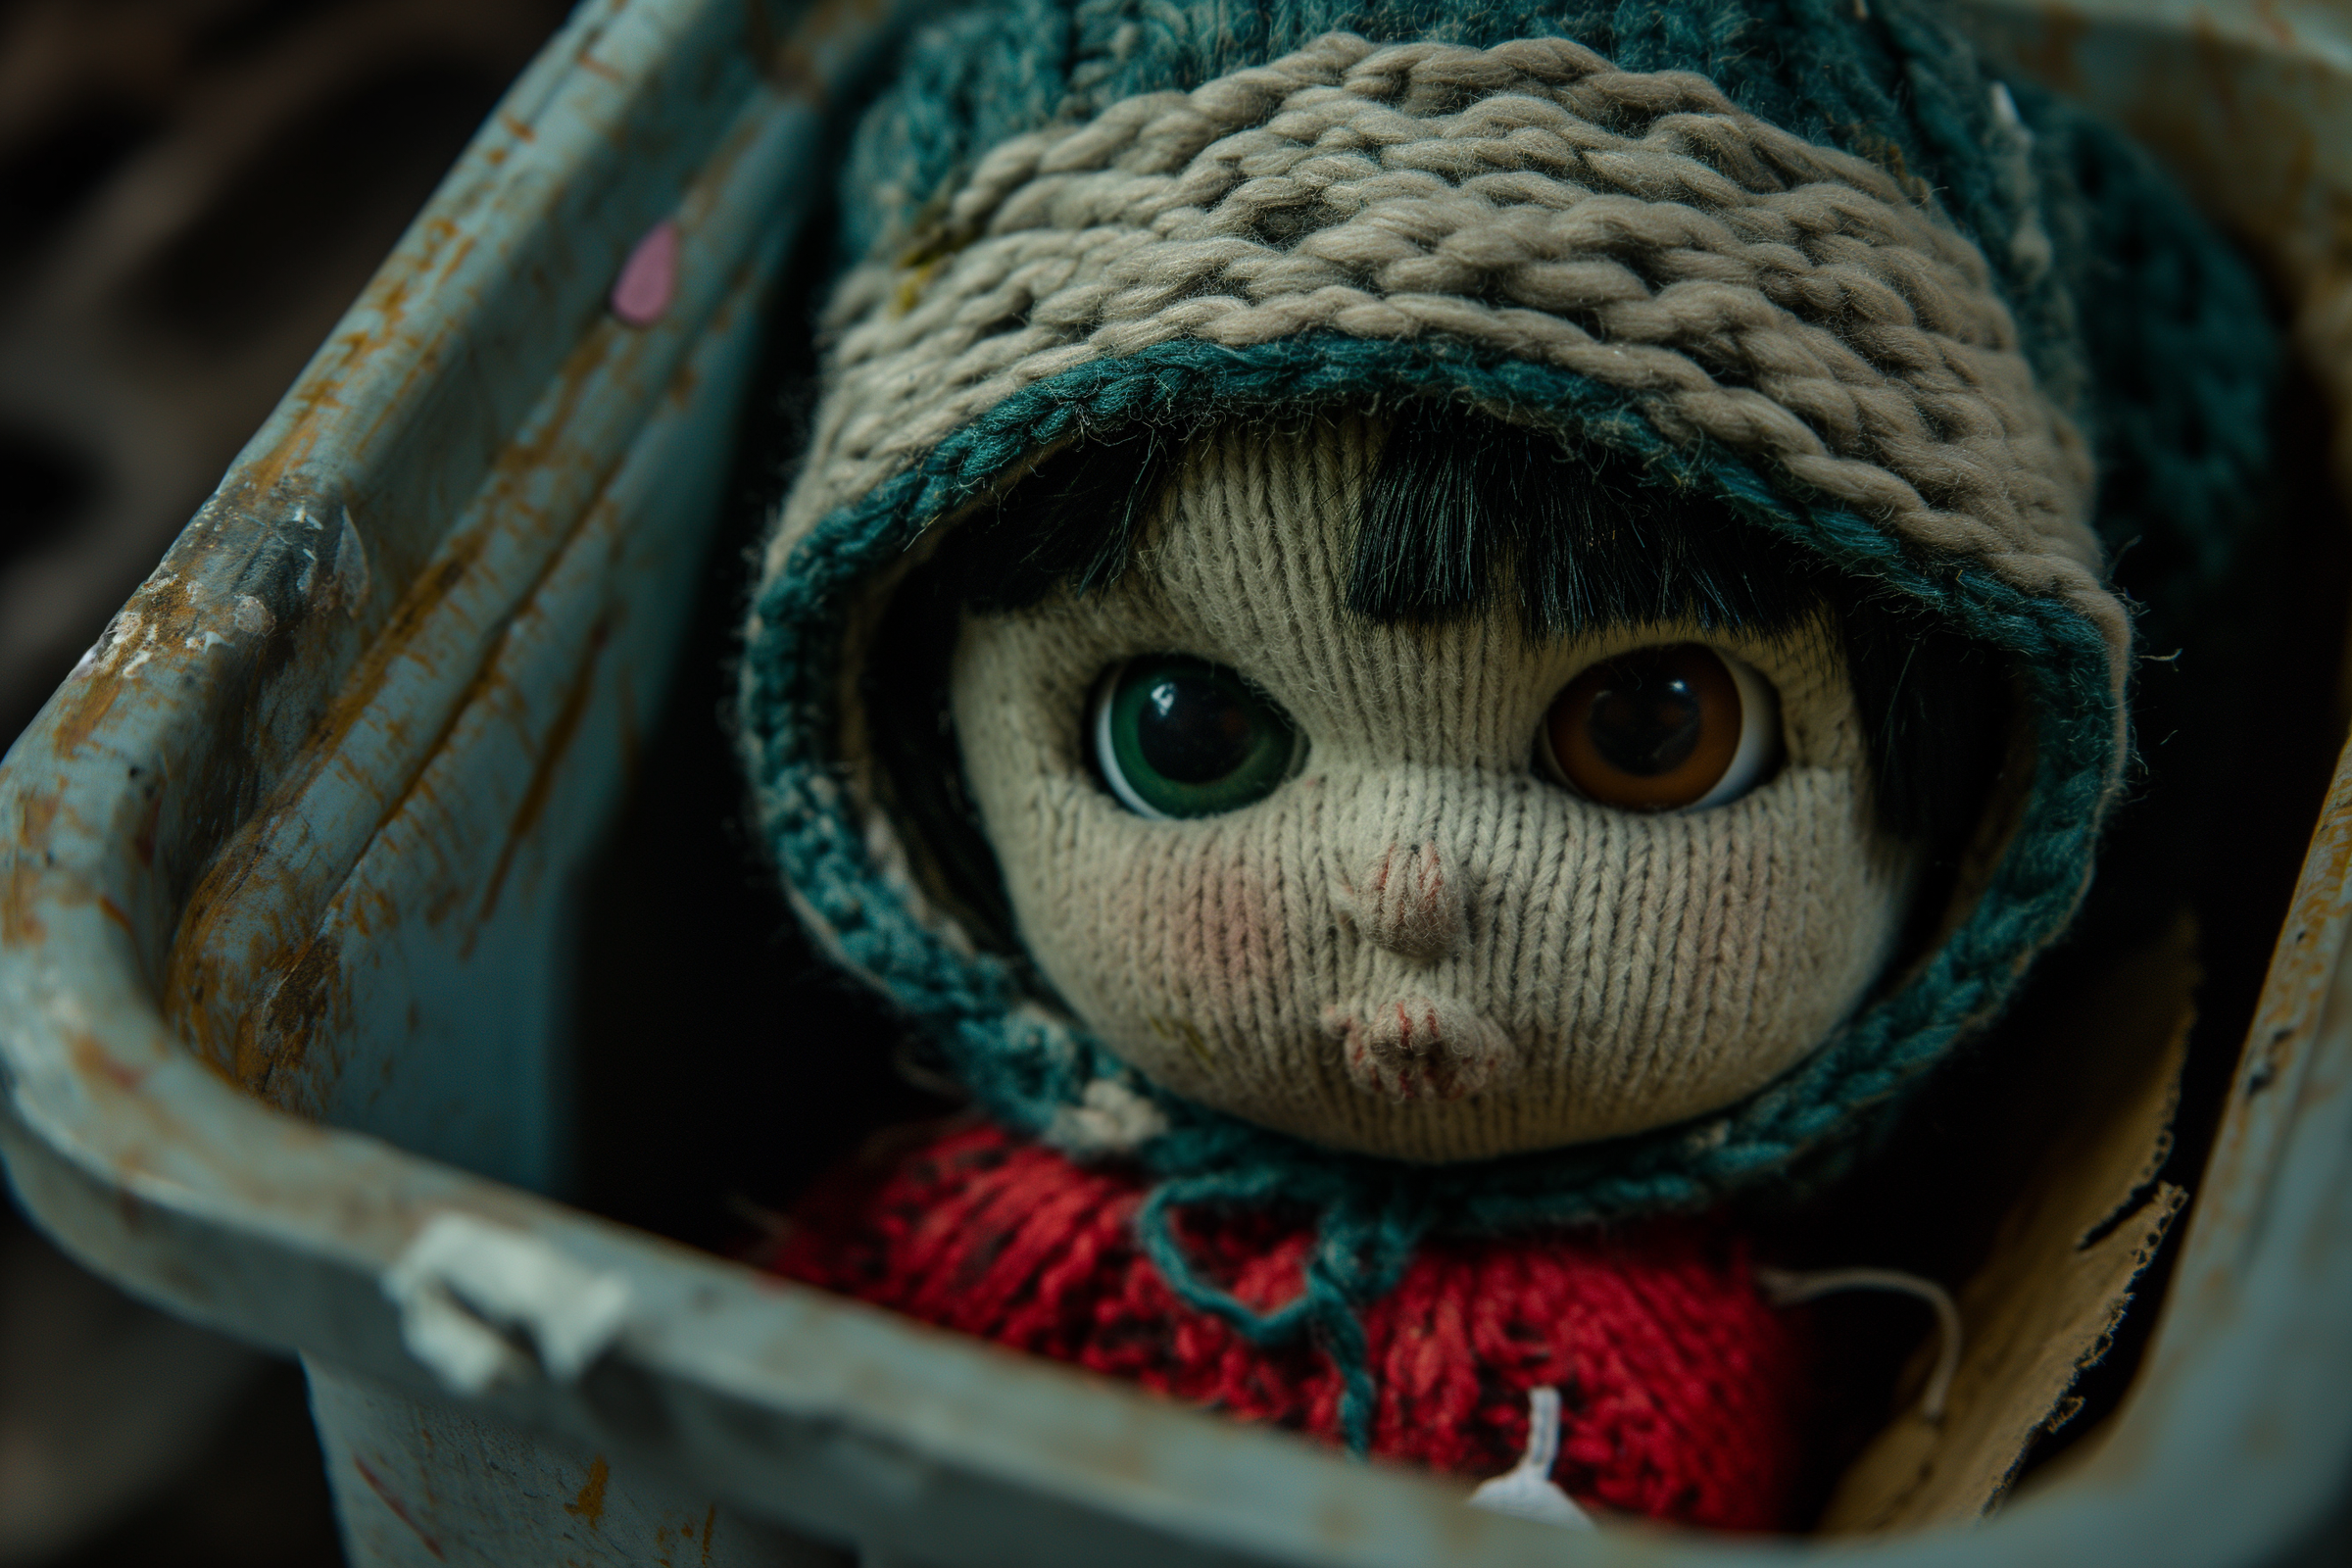 A doll in a trash can | Source: Midjourney